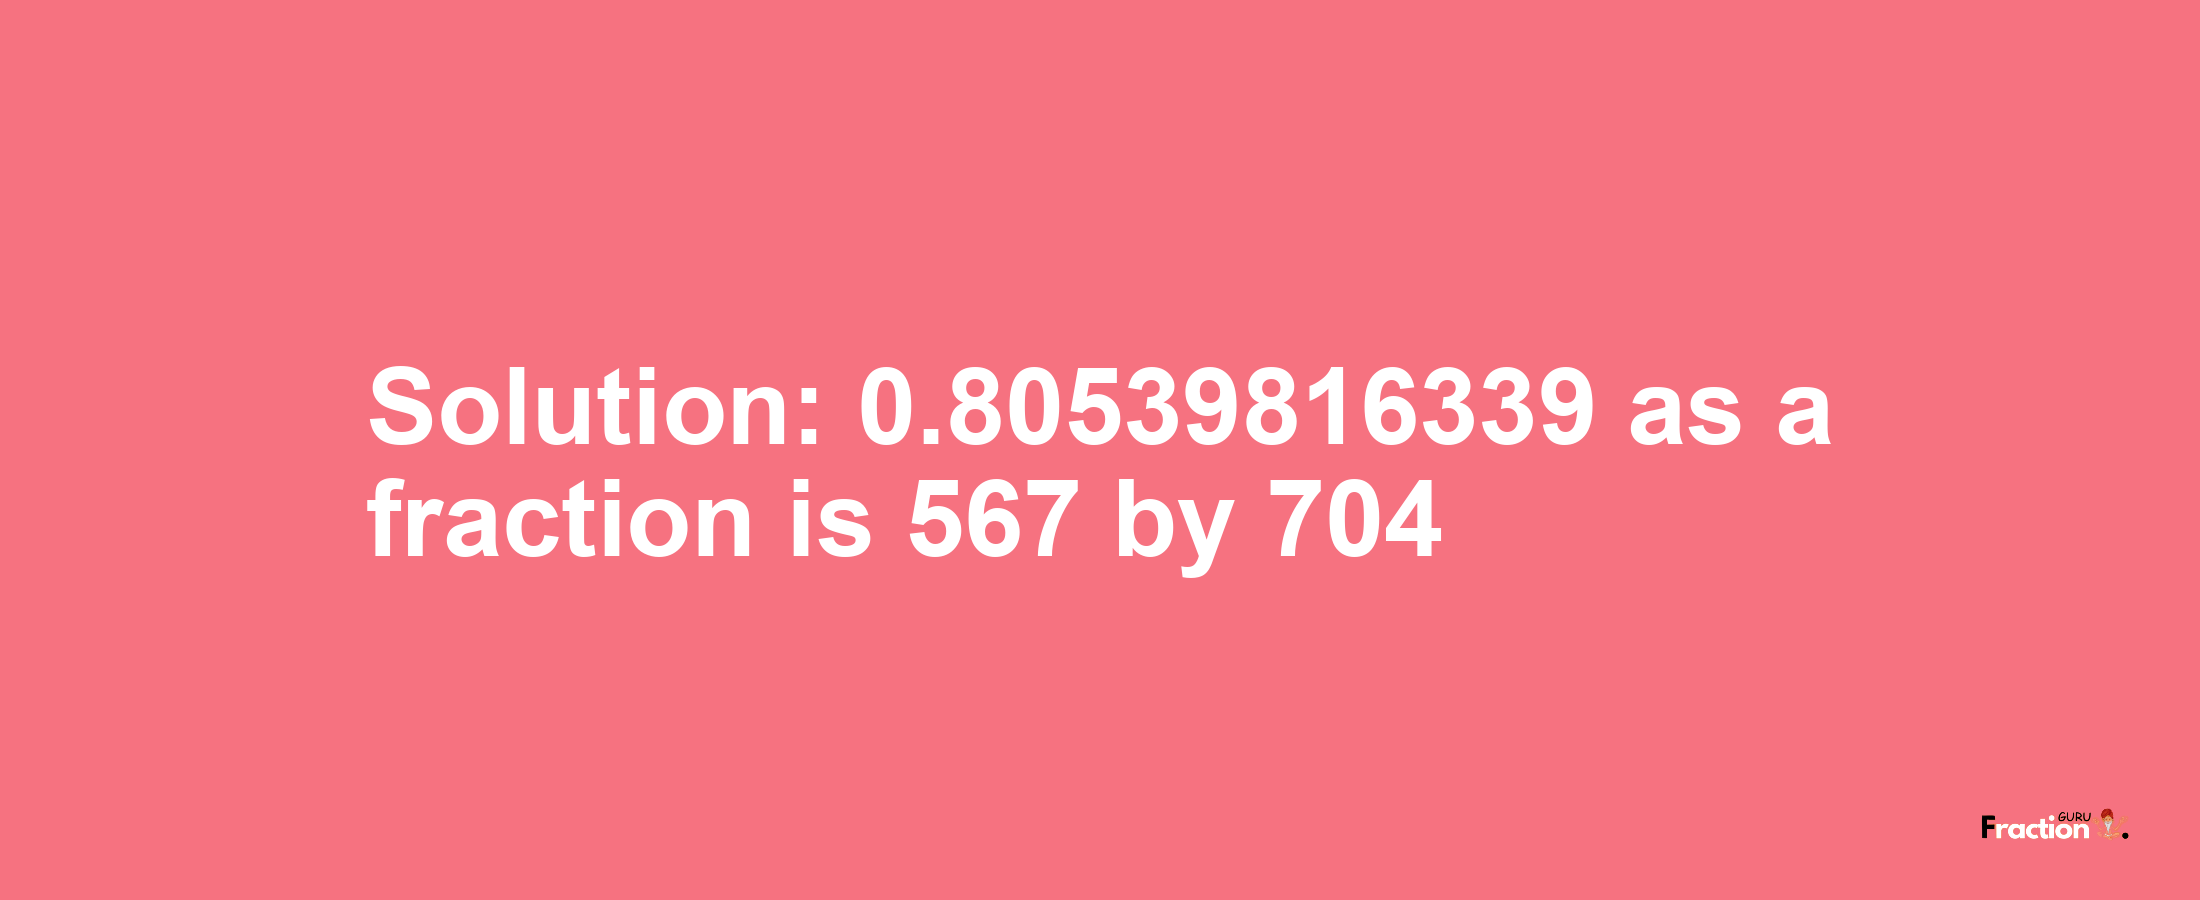 Solution:0.80539816339 as a fraction is 567/704